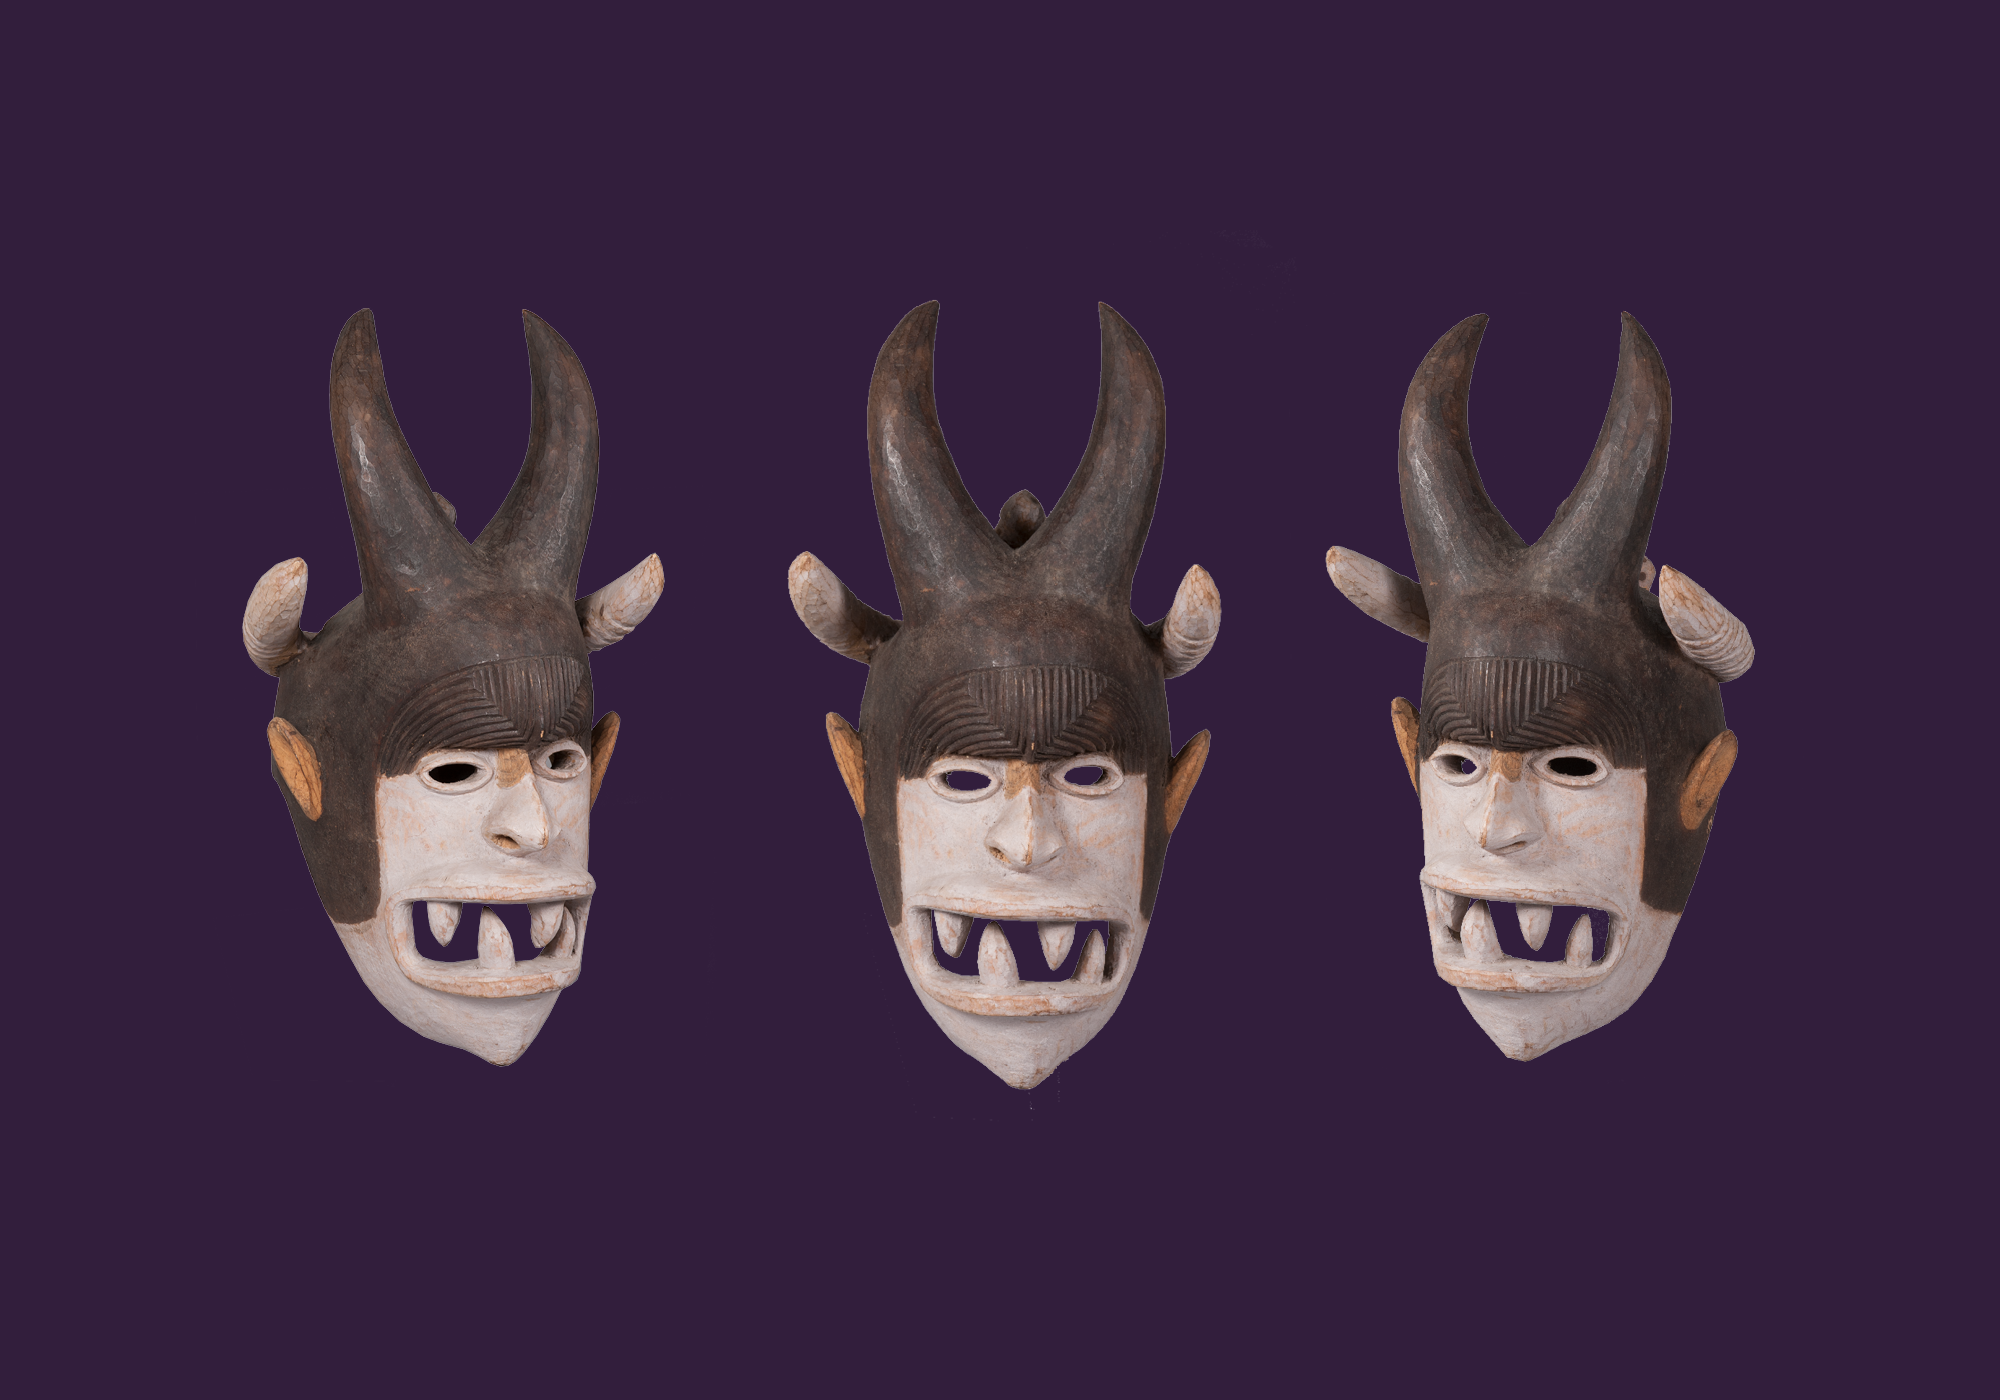 A composite image showing two side views alongside a full frontal view of the back of a wooden mask in the form of a face with an open mouth with pointed teeth and horns on top of the head. 